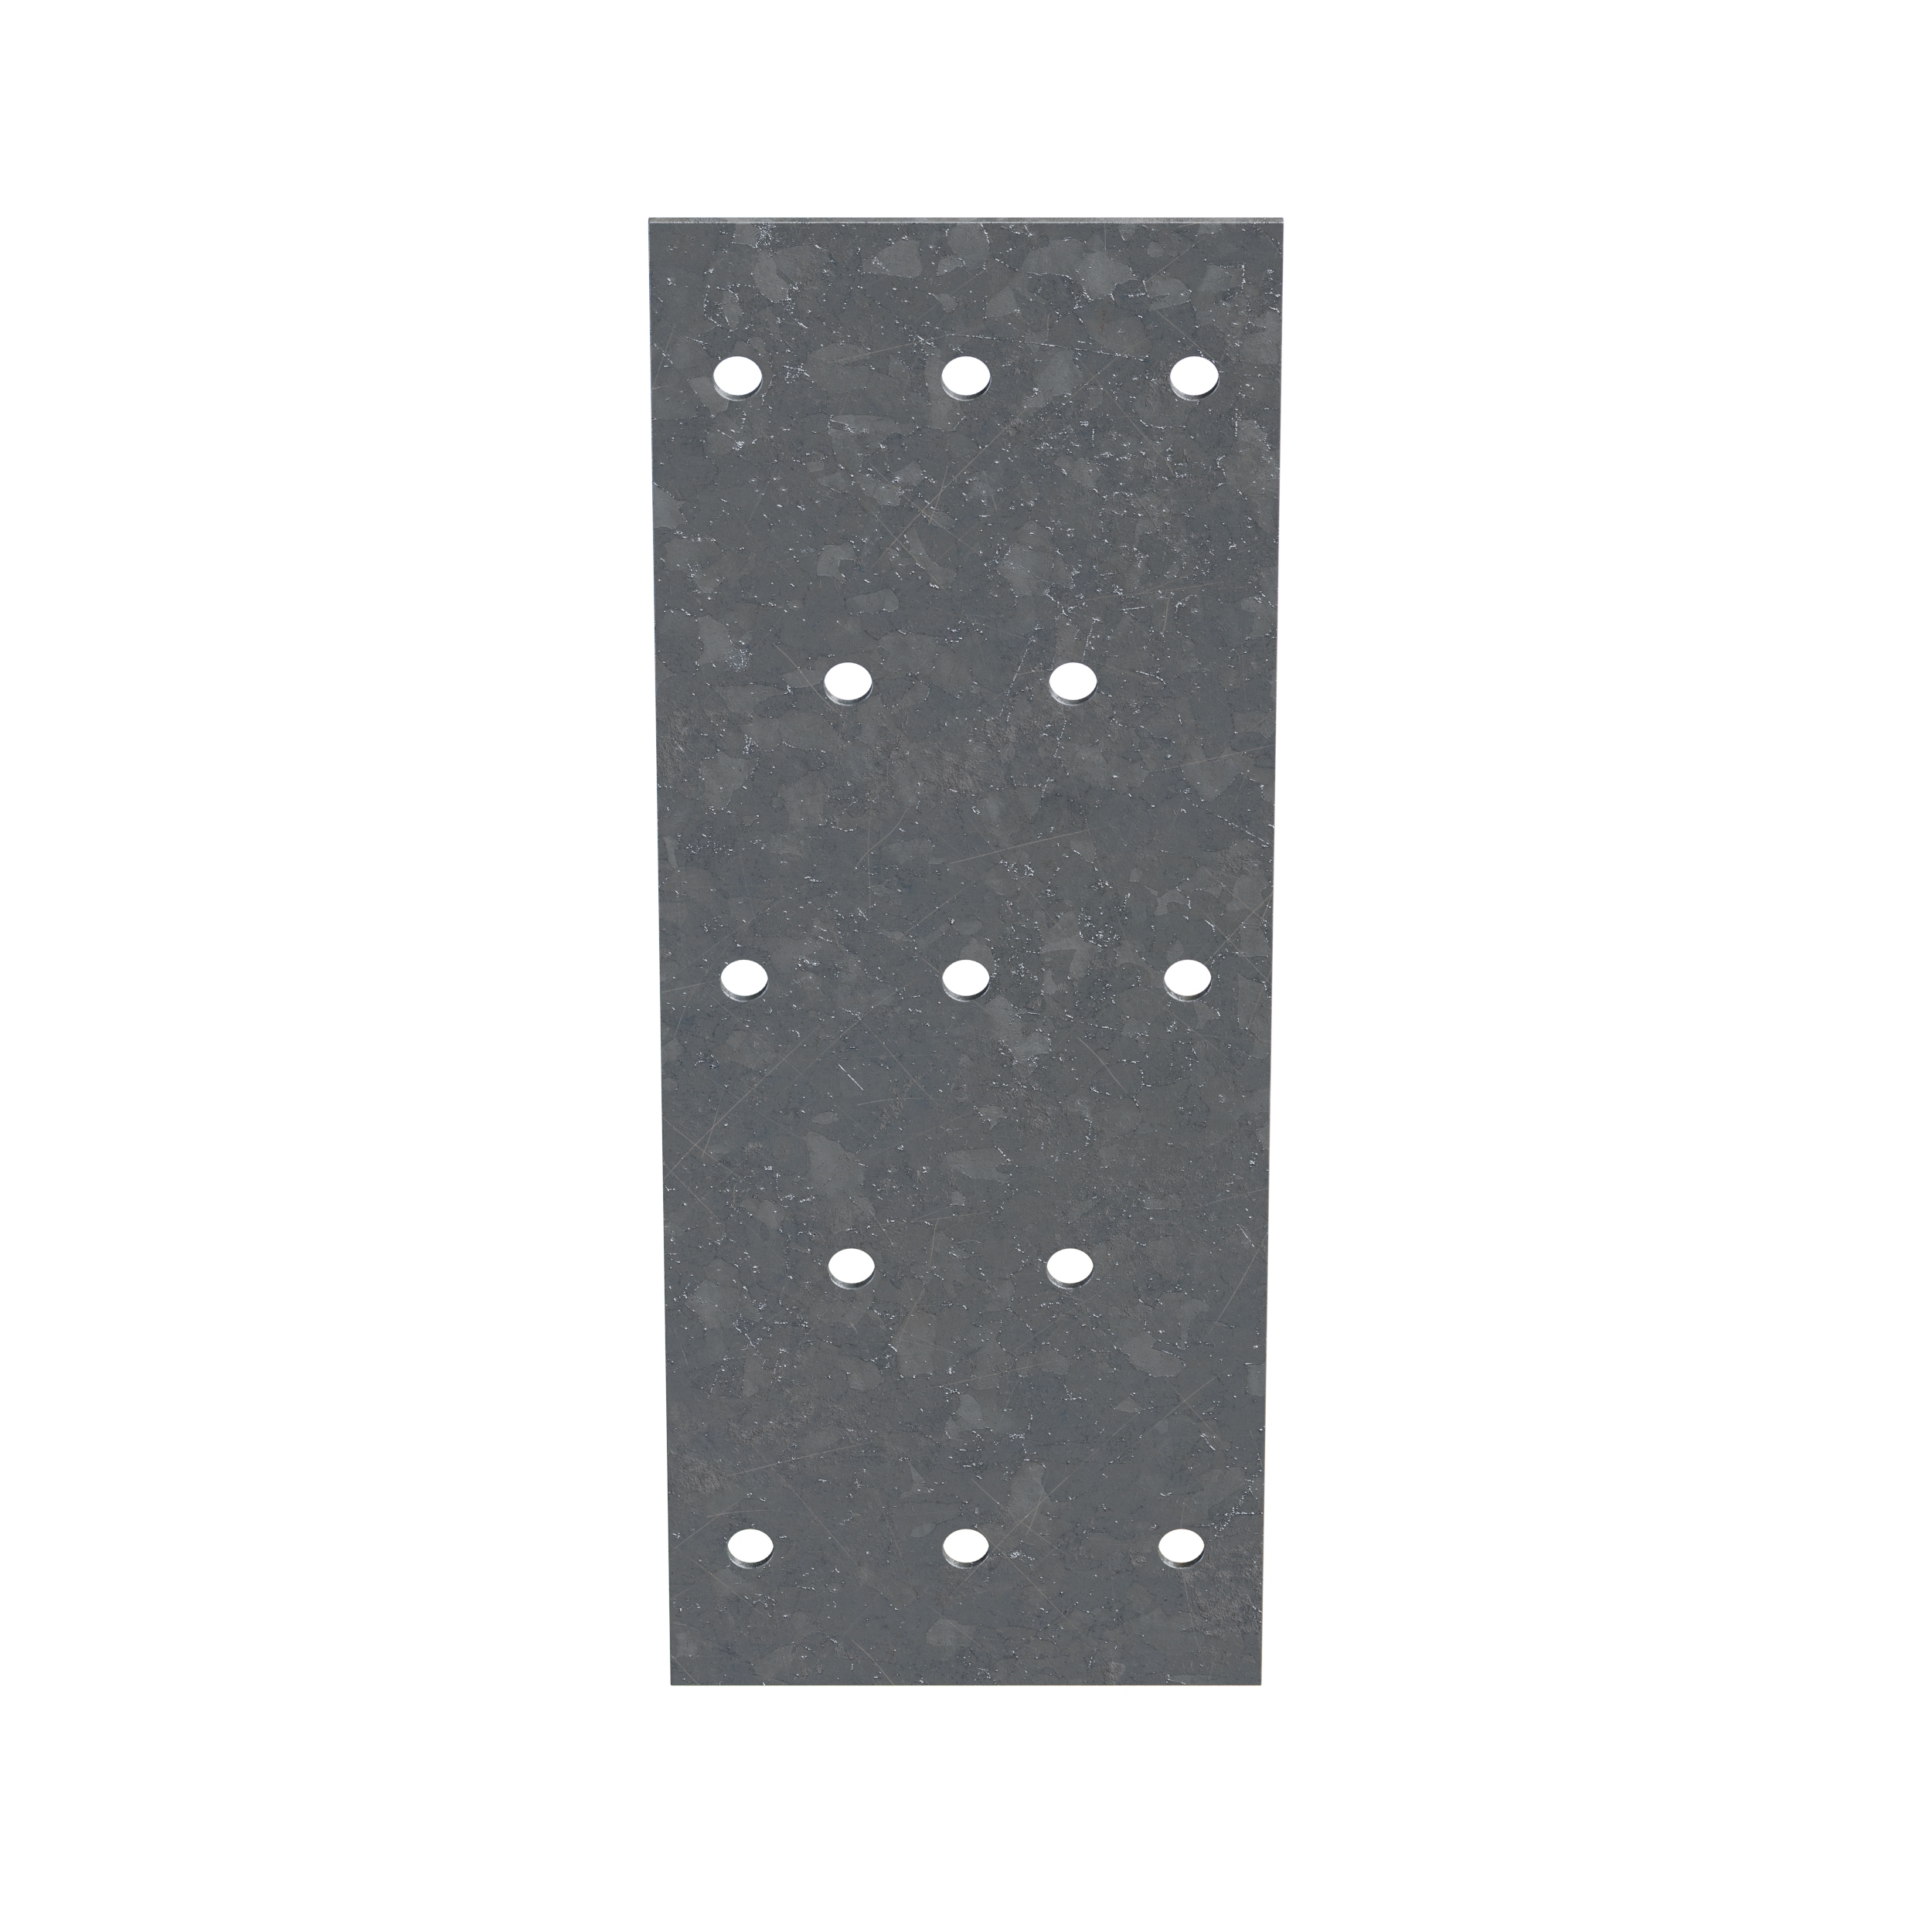 10x Steel Perforated Flat Strap 200mm X 30mm X 3mm Zinc Coated Galvanised Cheap 